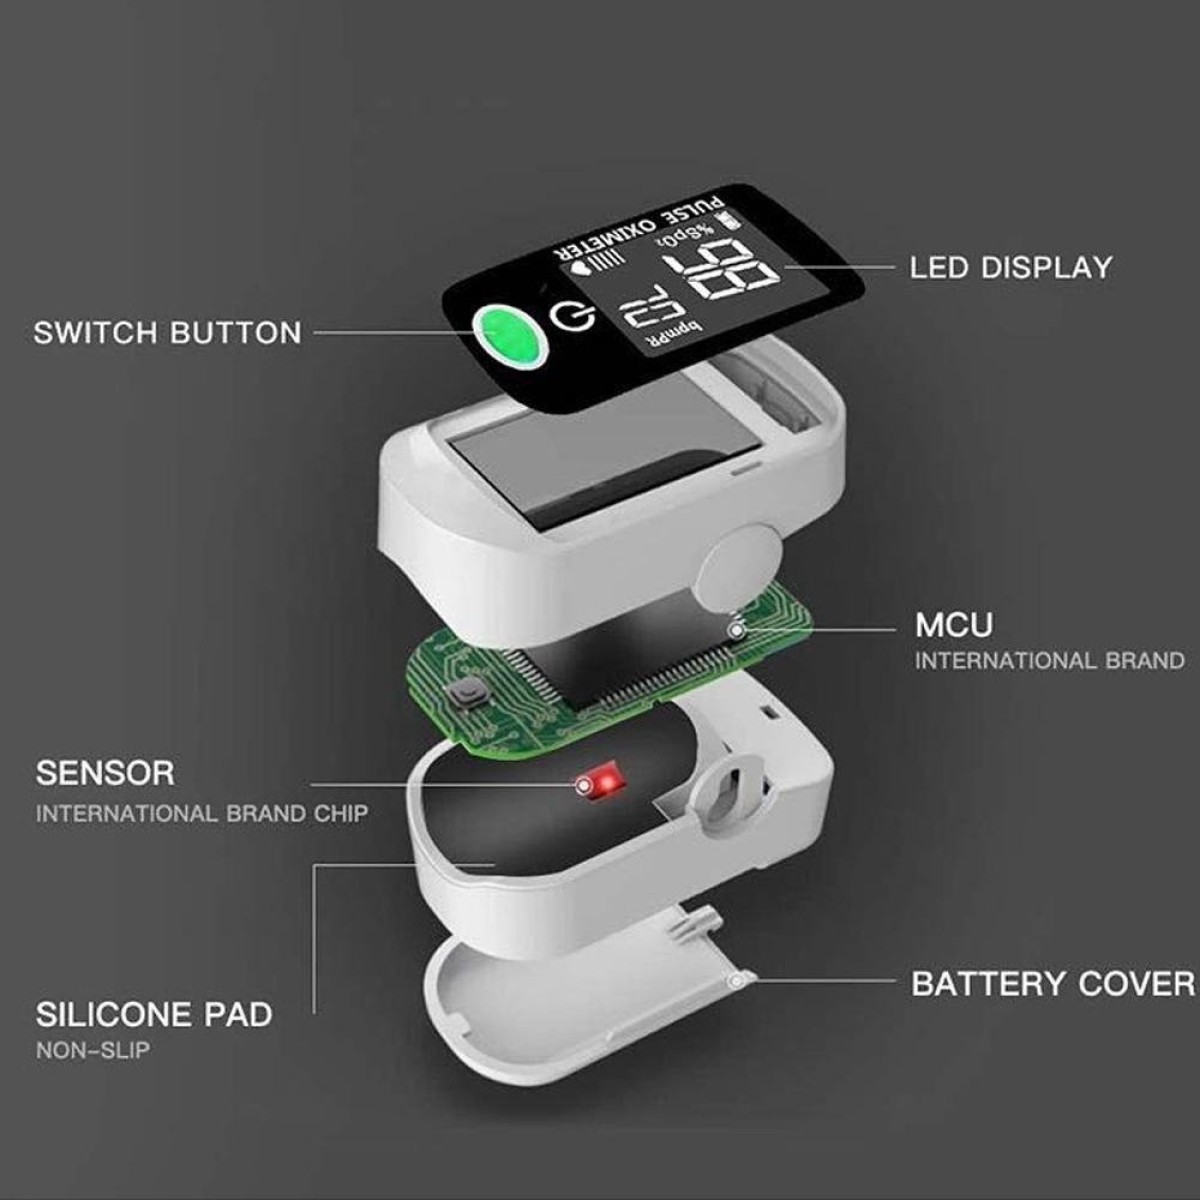 X1805 Oxygen Saturation Detector Medical Monitoring Heart Rate Finger Clip Oximeter